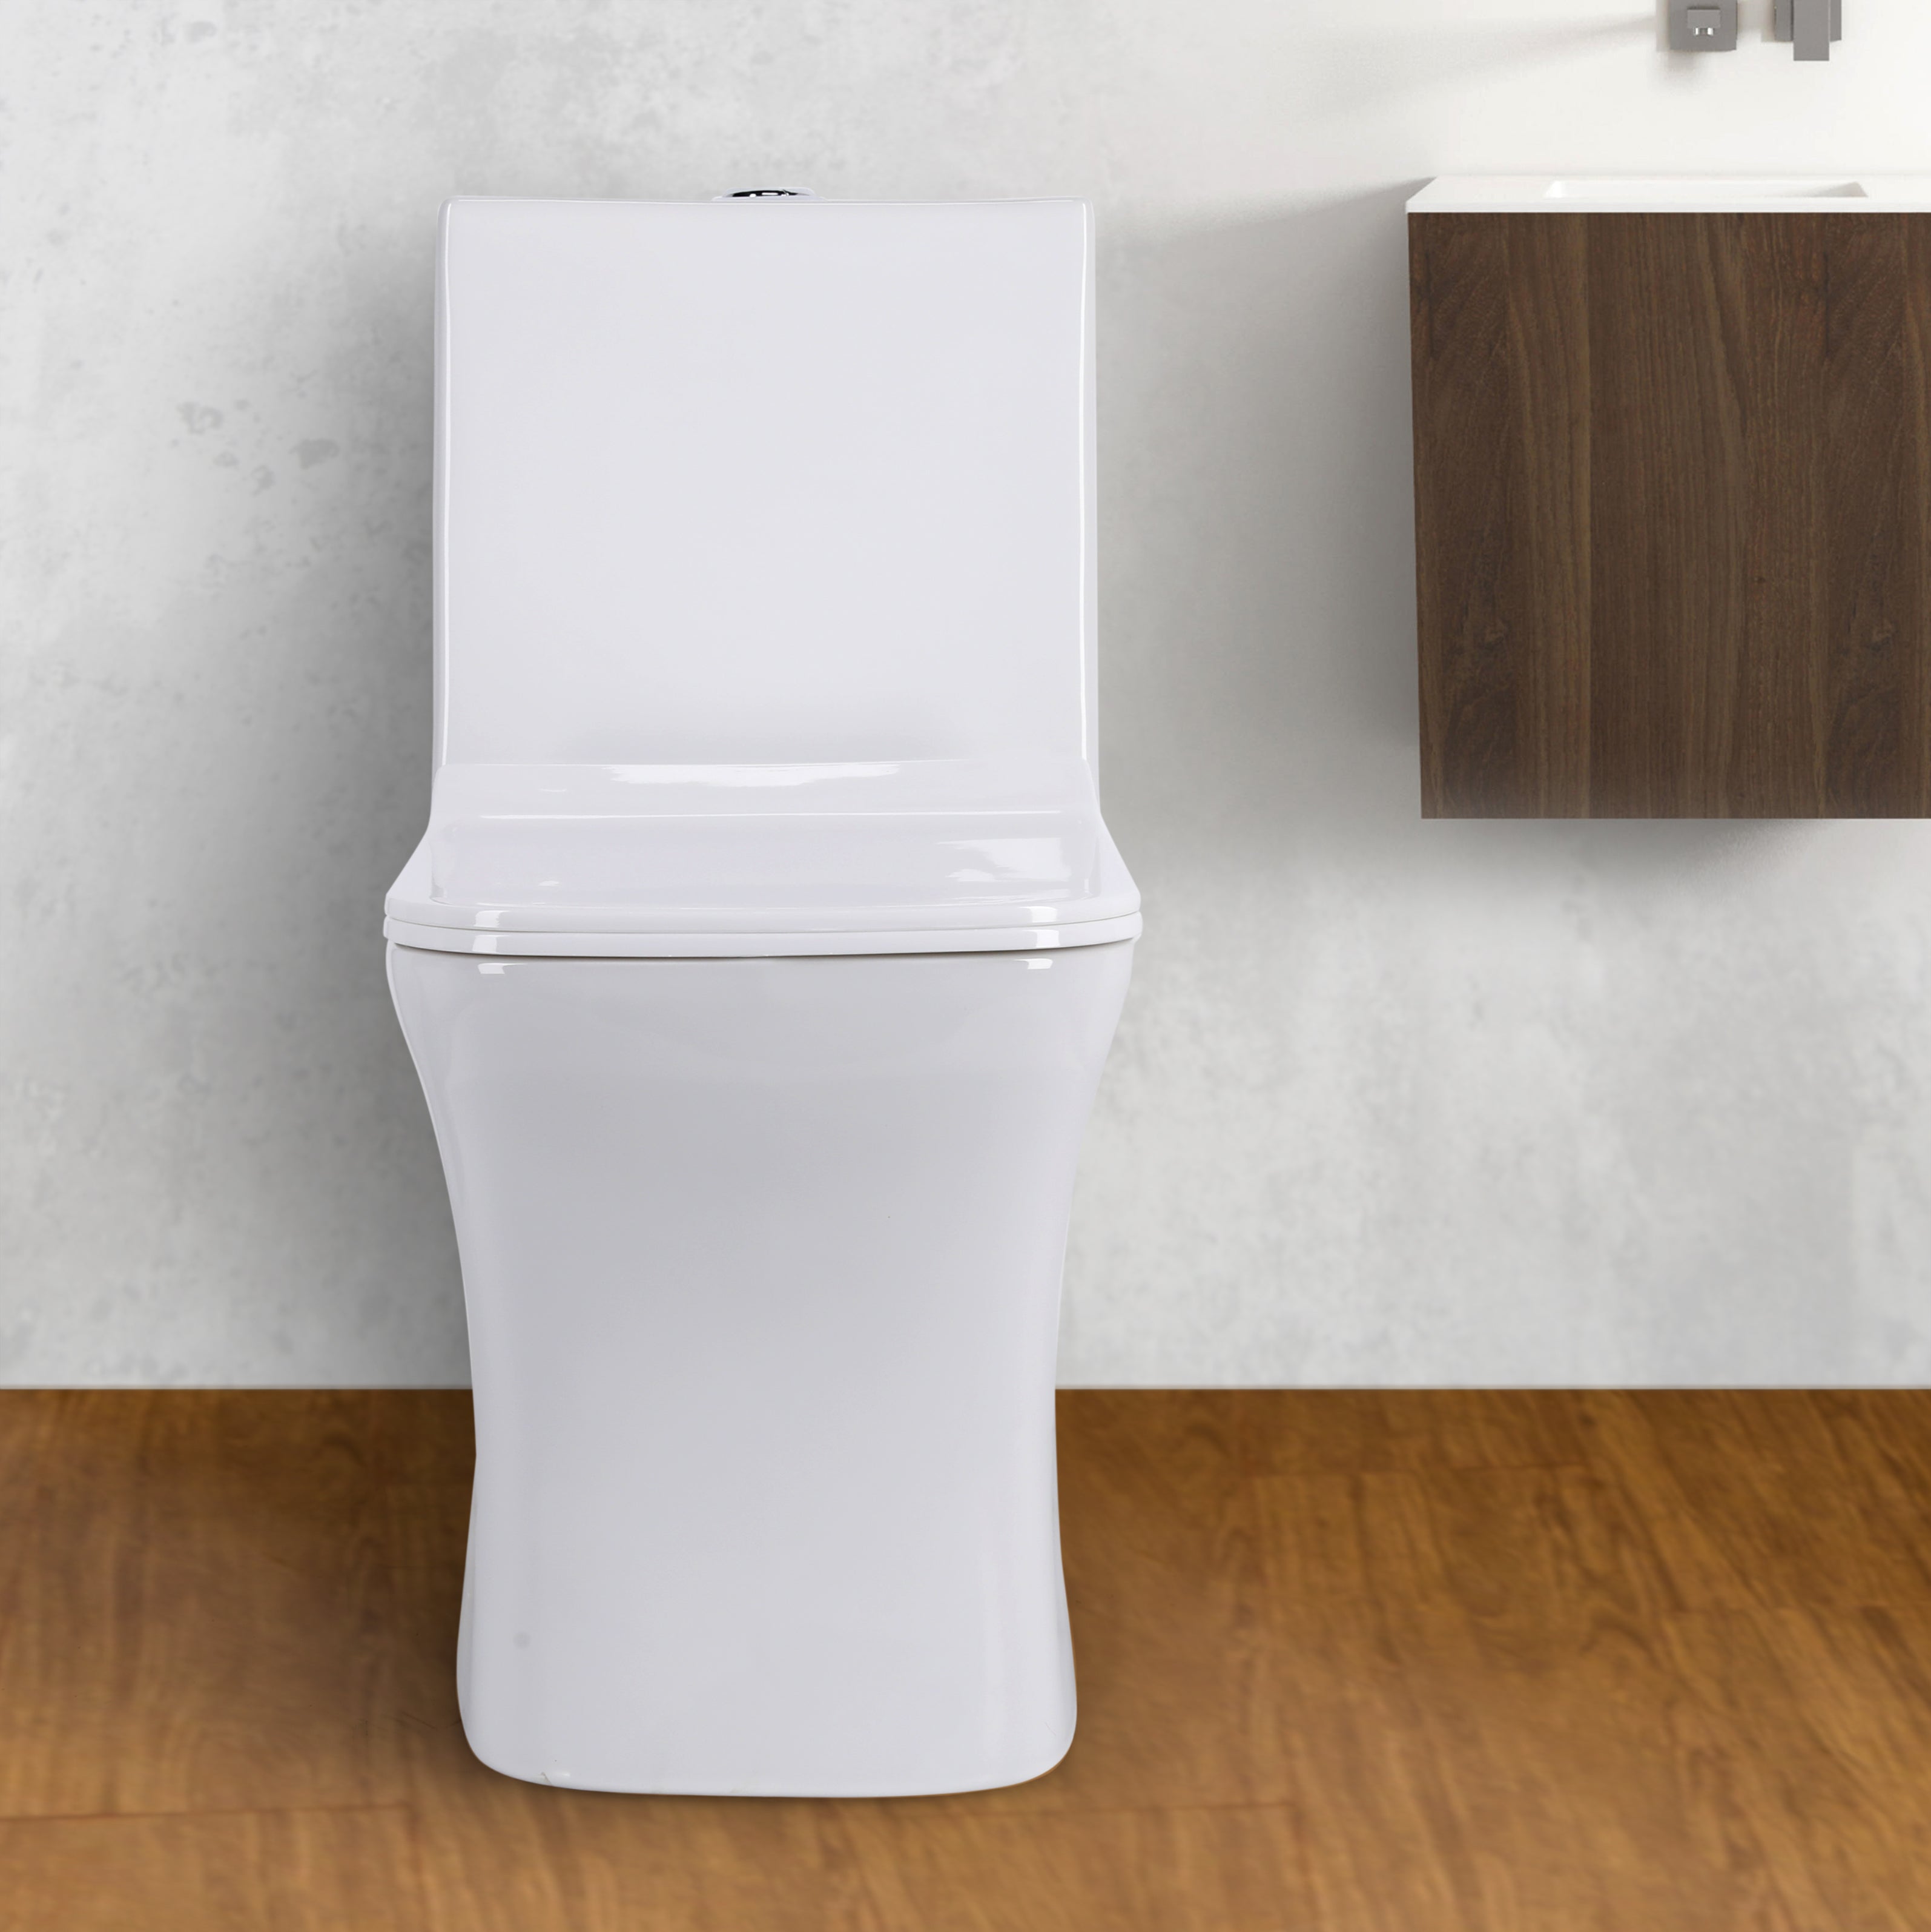 SQUARE Ceramic Western Toilet/Commode/European Commode Square With